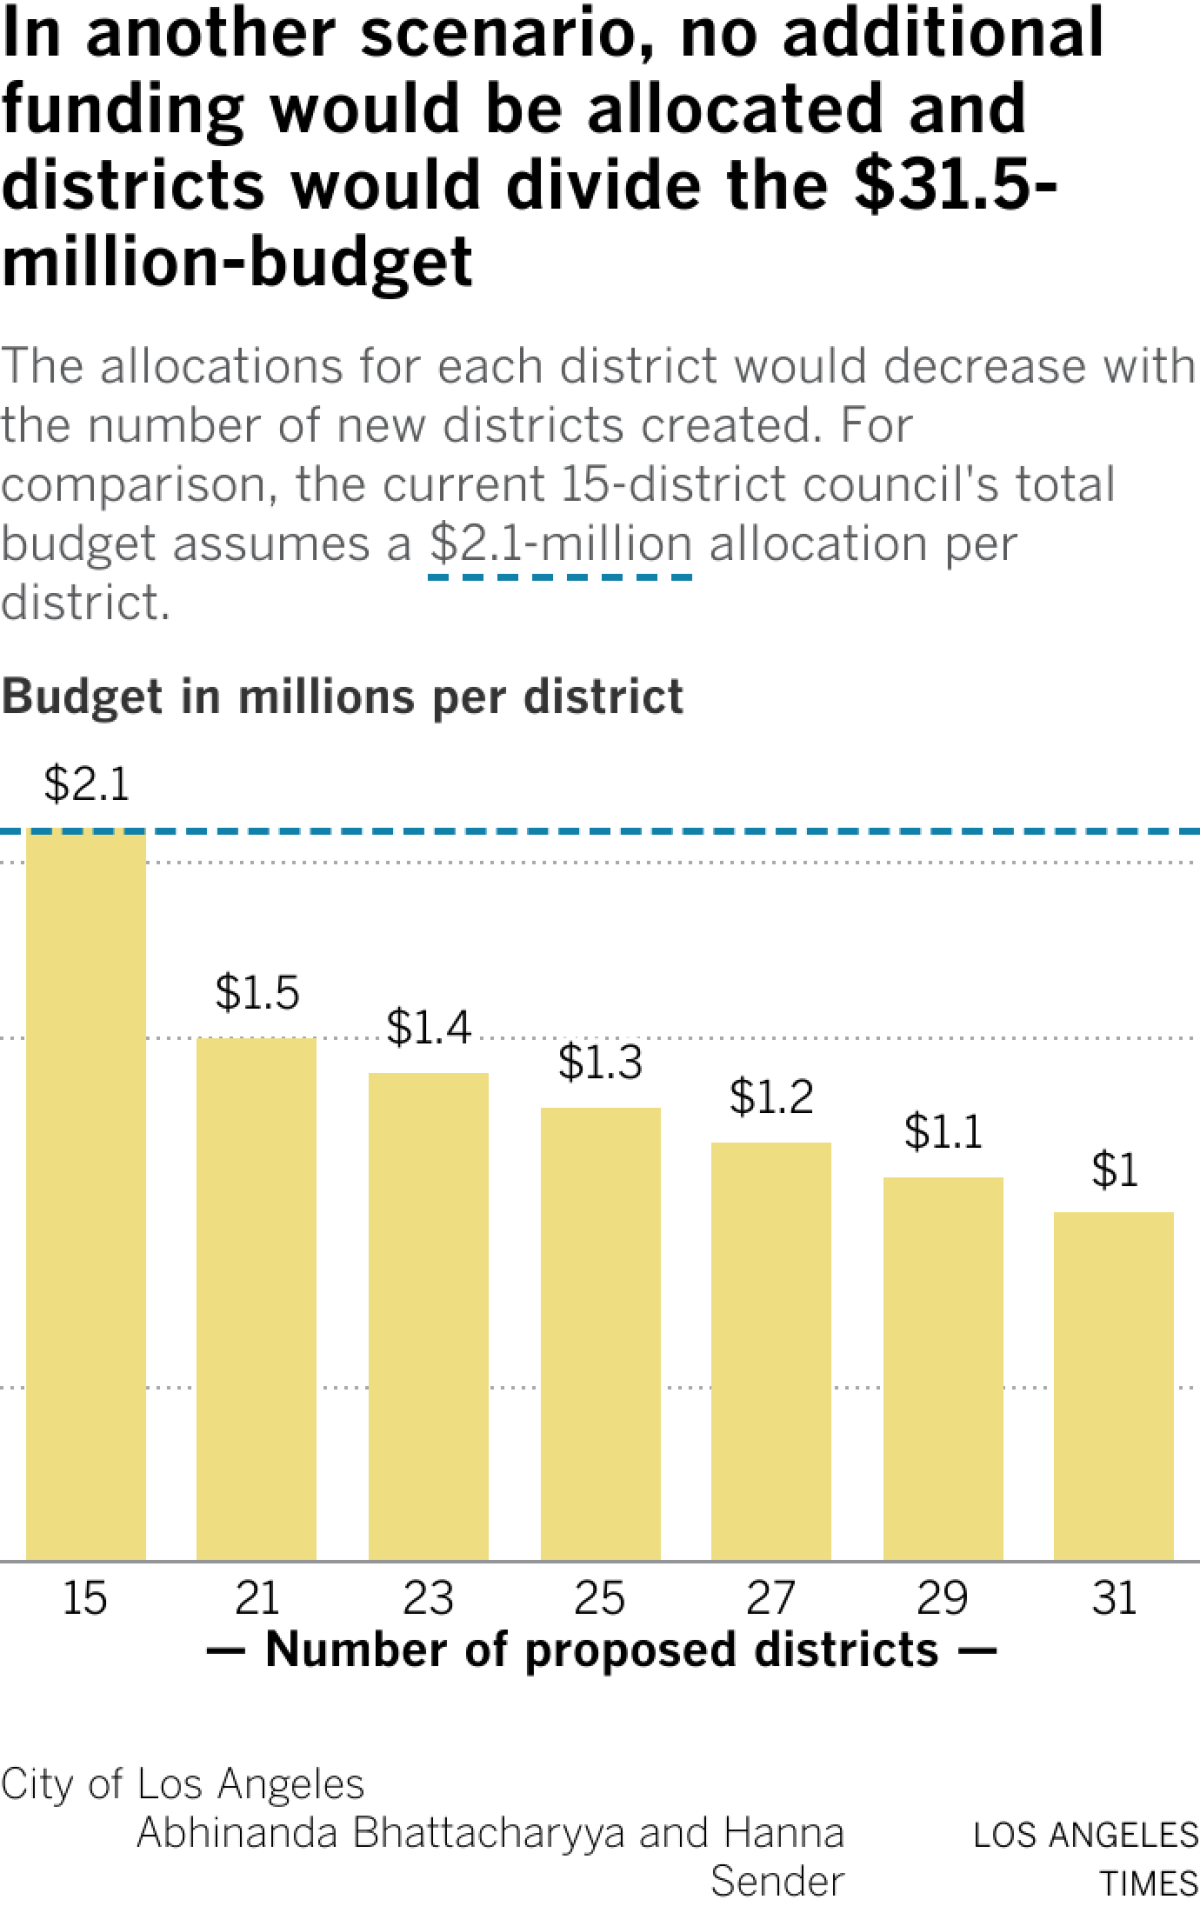 Bar chart showing funding for each district if no additional allocations are made with an increase in the number of districts. The chart shows the funding per district decreasing with the number of districts, and a dotted baseline showing another scenario where each district receives $2.1 million in funding.